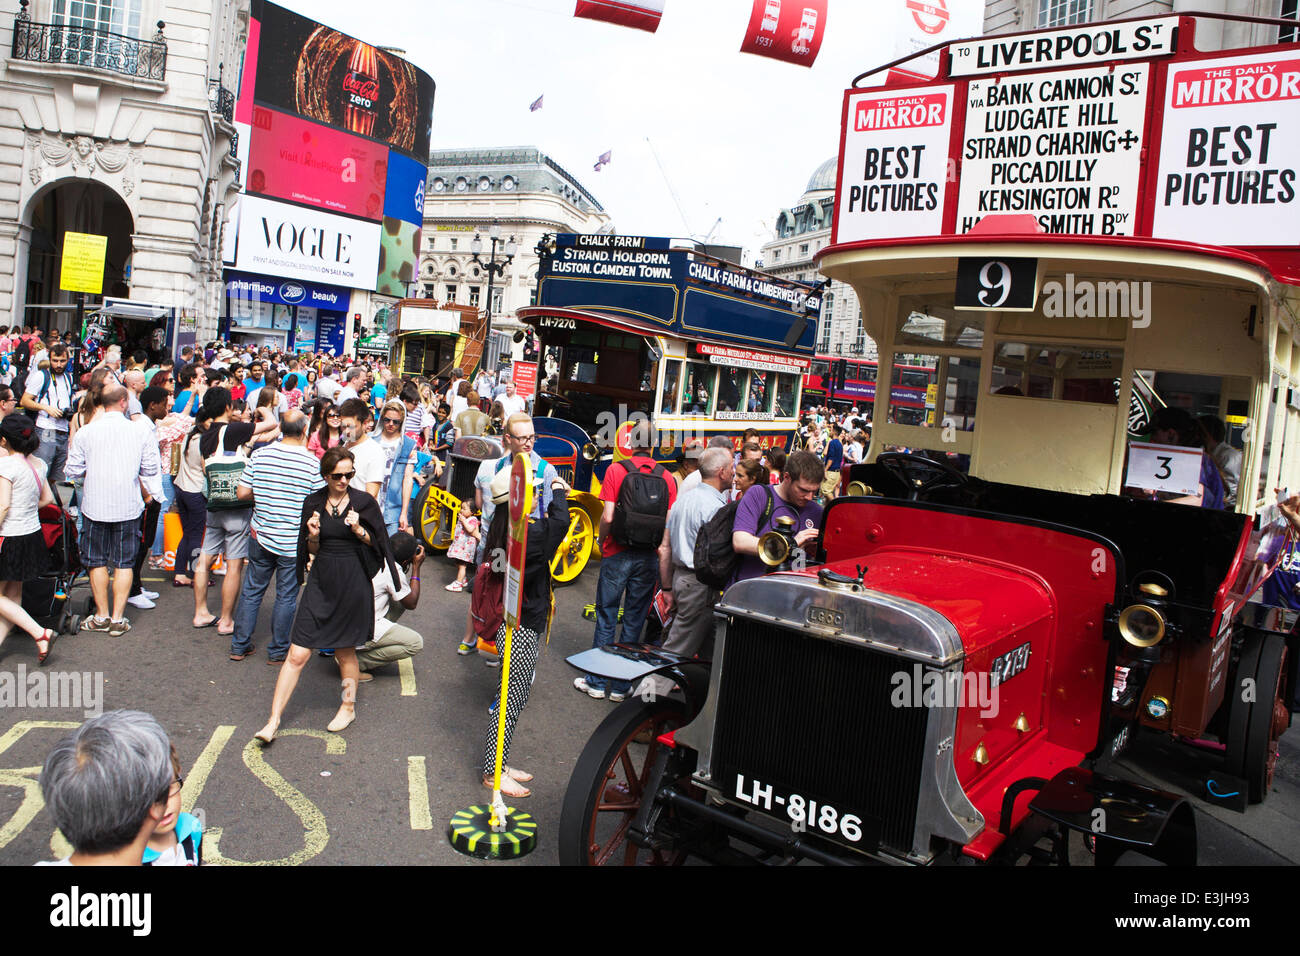 Regent Street, London, UK, 22nd June 2014. 2014 is the Year of the Bus: to celebrate this, Regent Street became traffic free and hosted iconic buses used in London from 1829 to present day.  Classic London open top buses. advertising and crowds of people. Credit:  Tony Farrugia/Alamy Live News Stock Photo